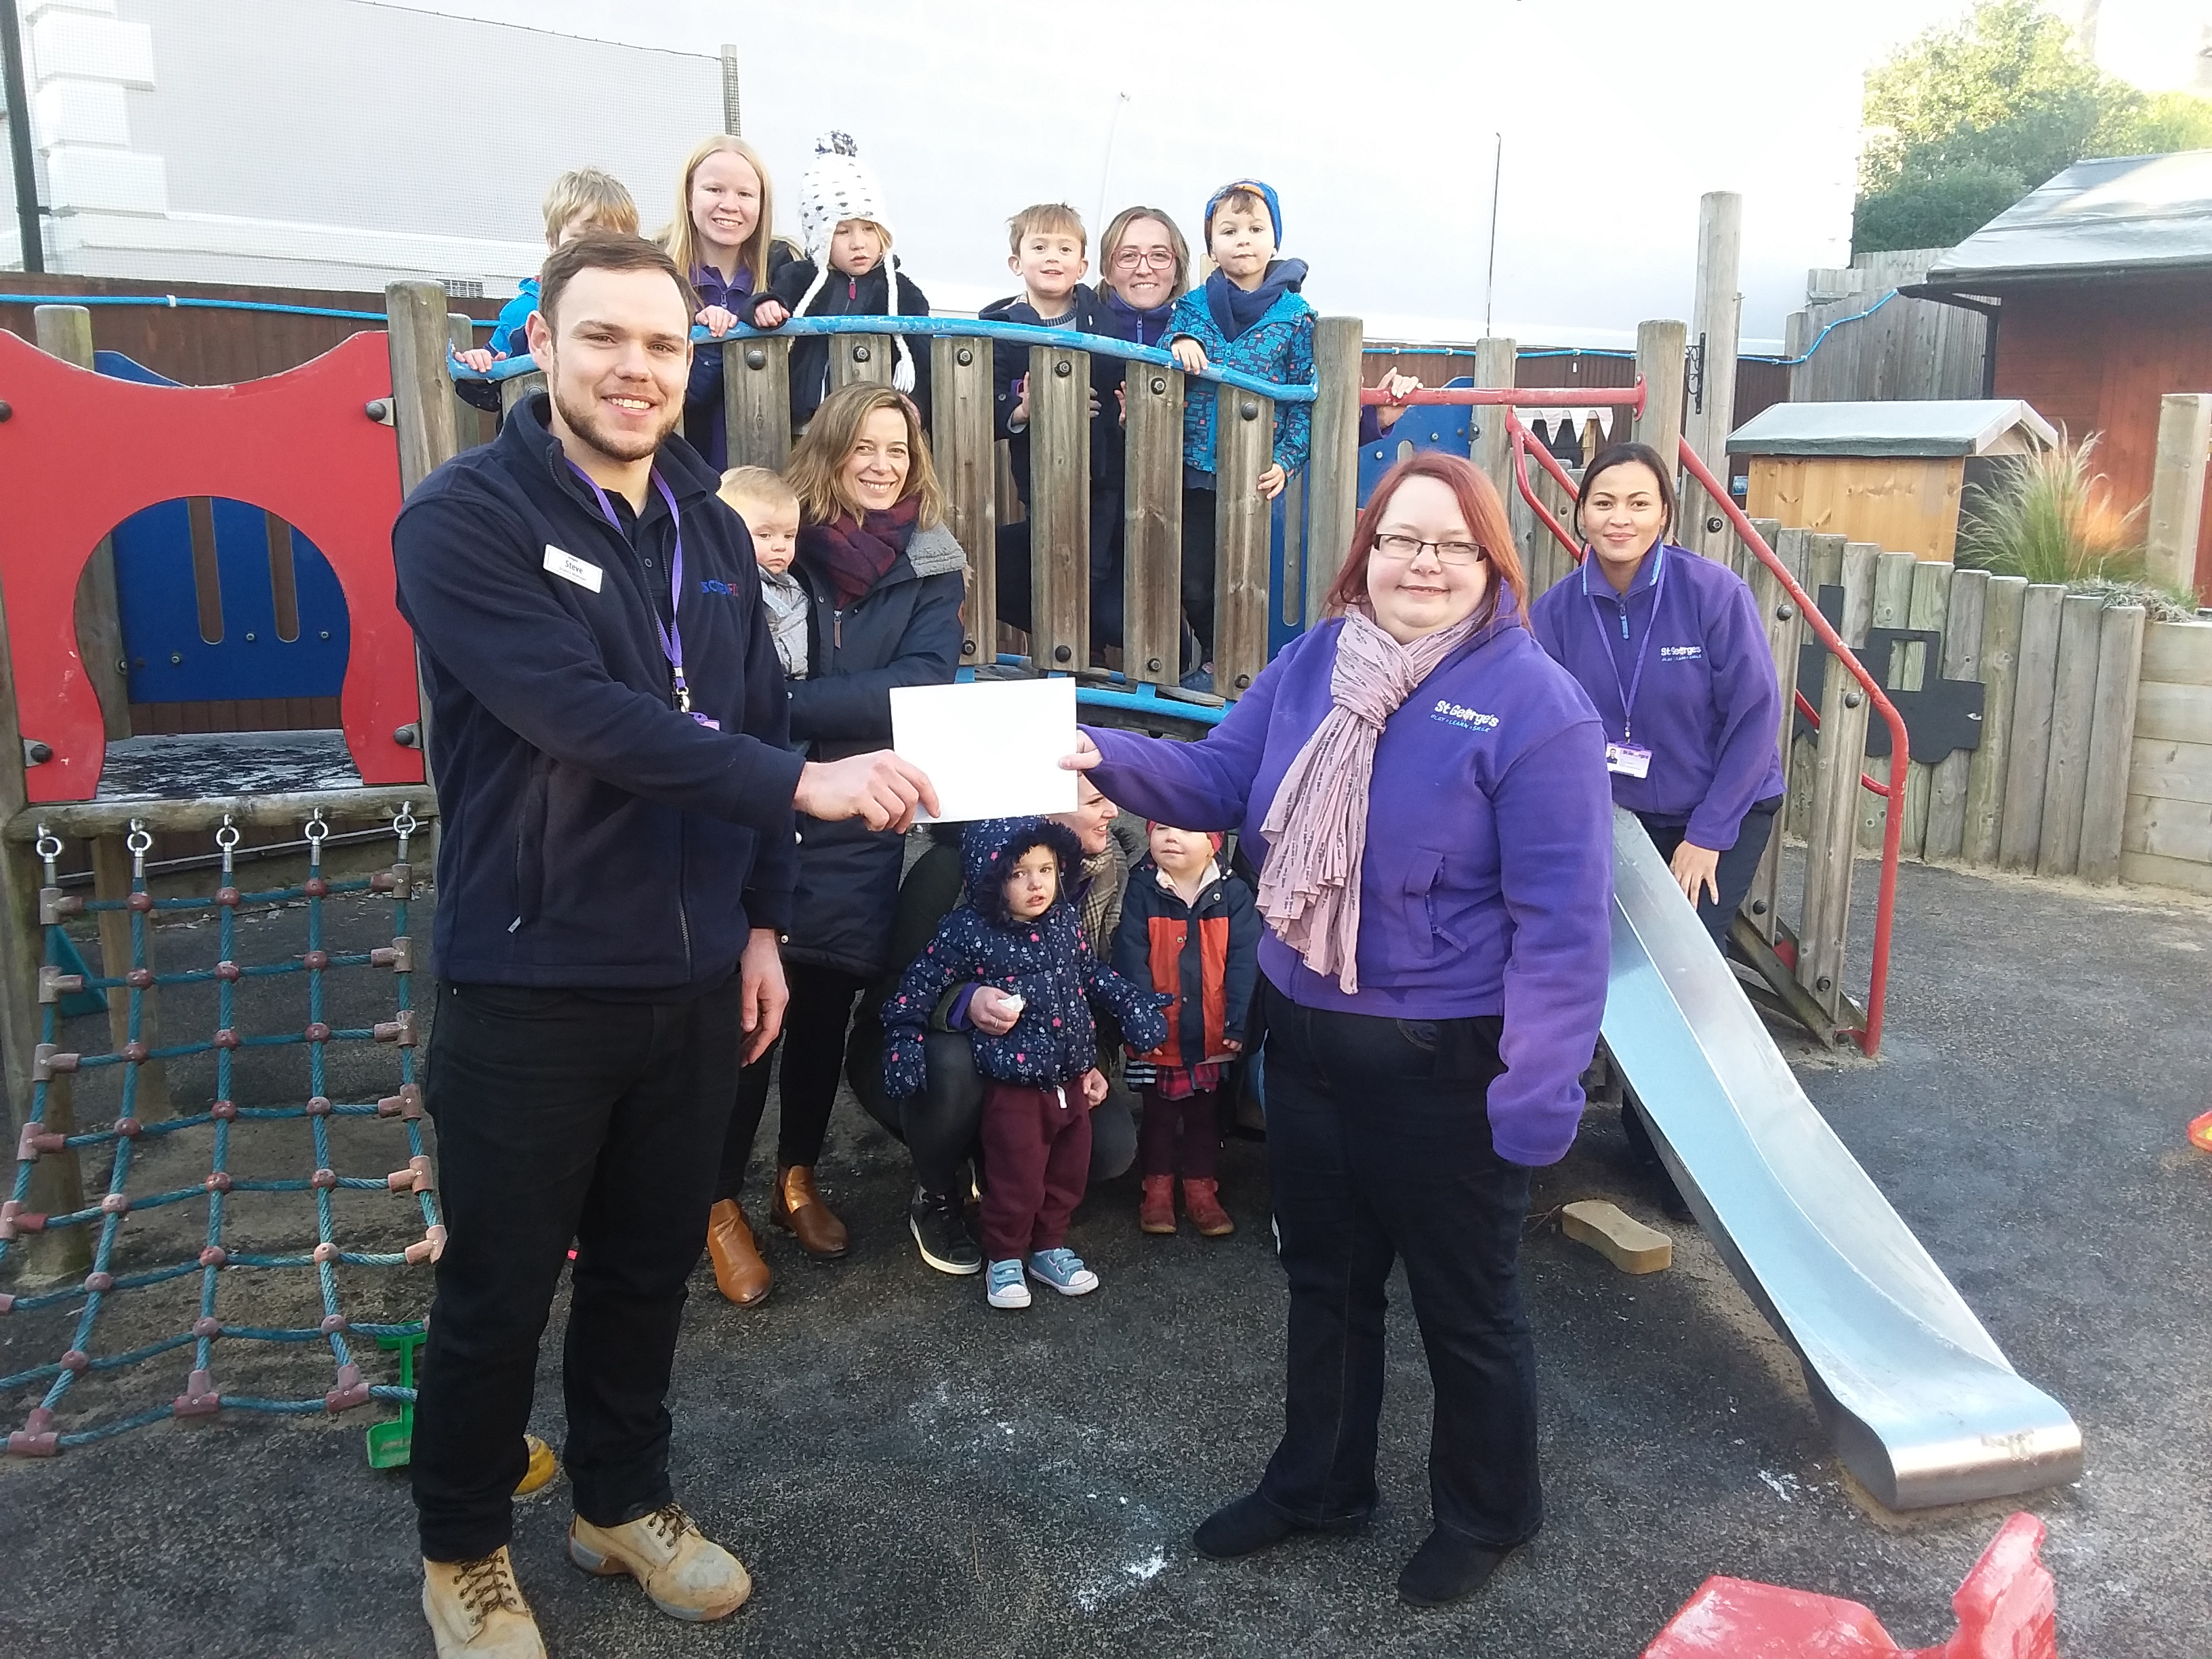 Tunbridge Wells based charity gets a helping hand from the Screwfix Foundation